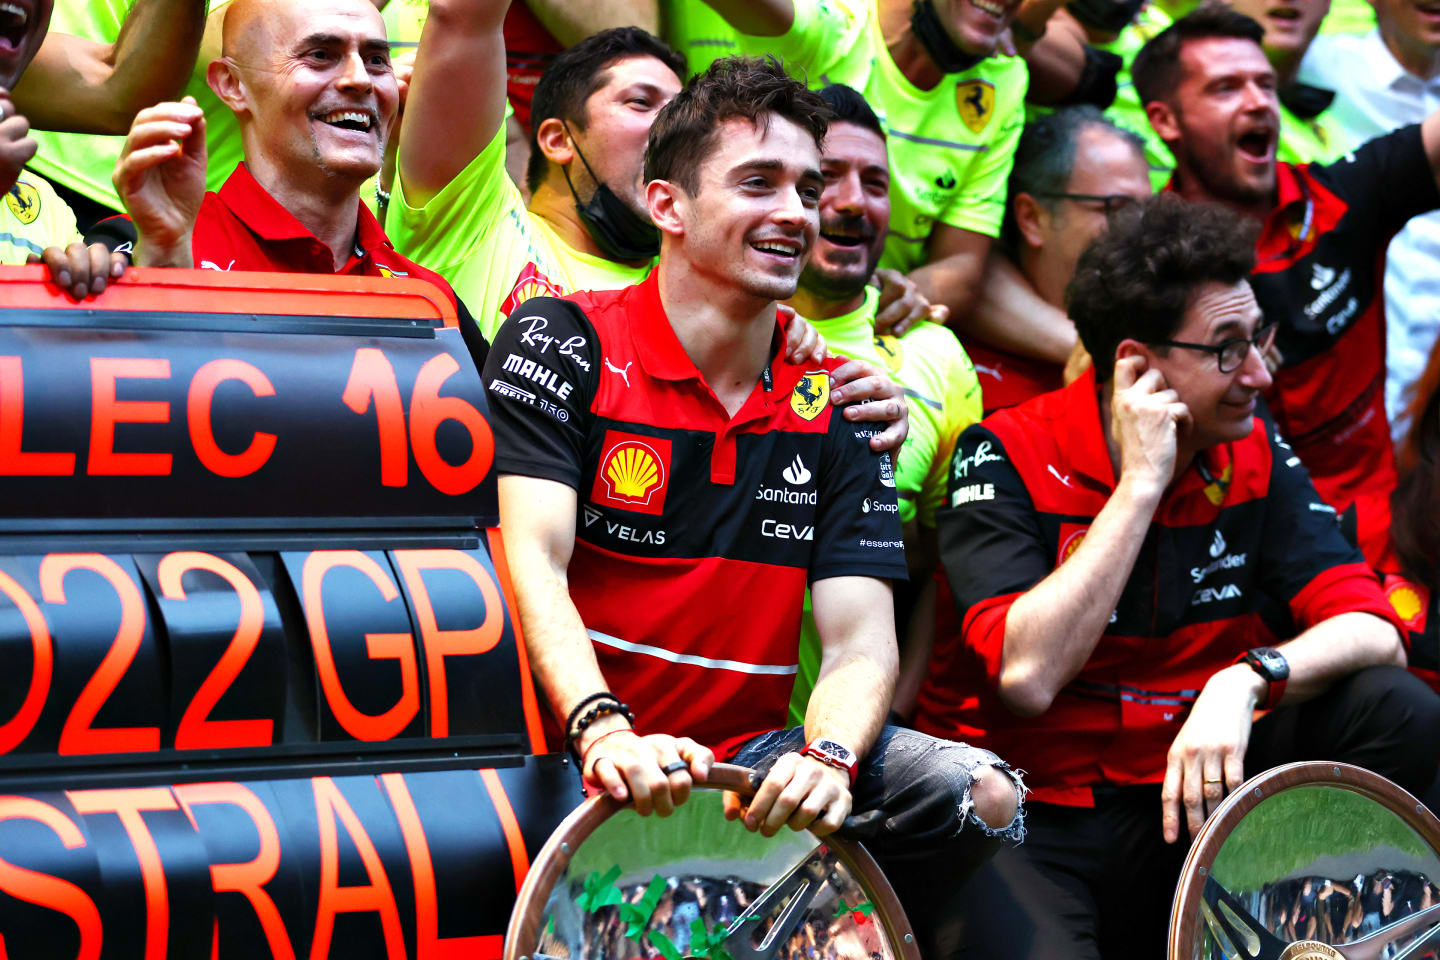 MELBOURNE, AUSTRALIA - APRIL 10: Race winner Charles Leclerc of Monaco and Ferrari celebrates with his team after the F1 Grand Prix of Australia at Melbourne Grand Prix Circuit on April 10, 2022 in Melbourne, Australia. (Photo by Bryn Lennon - Formula 1/Formula 1 via Getty Images)